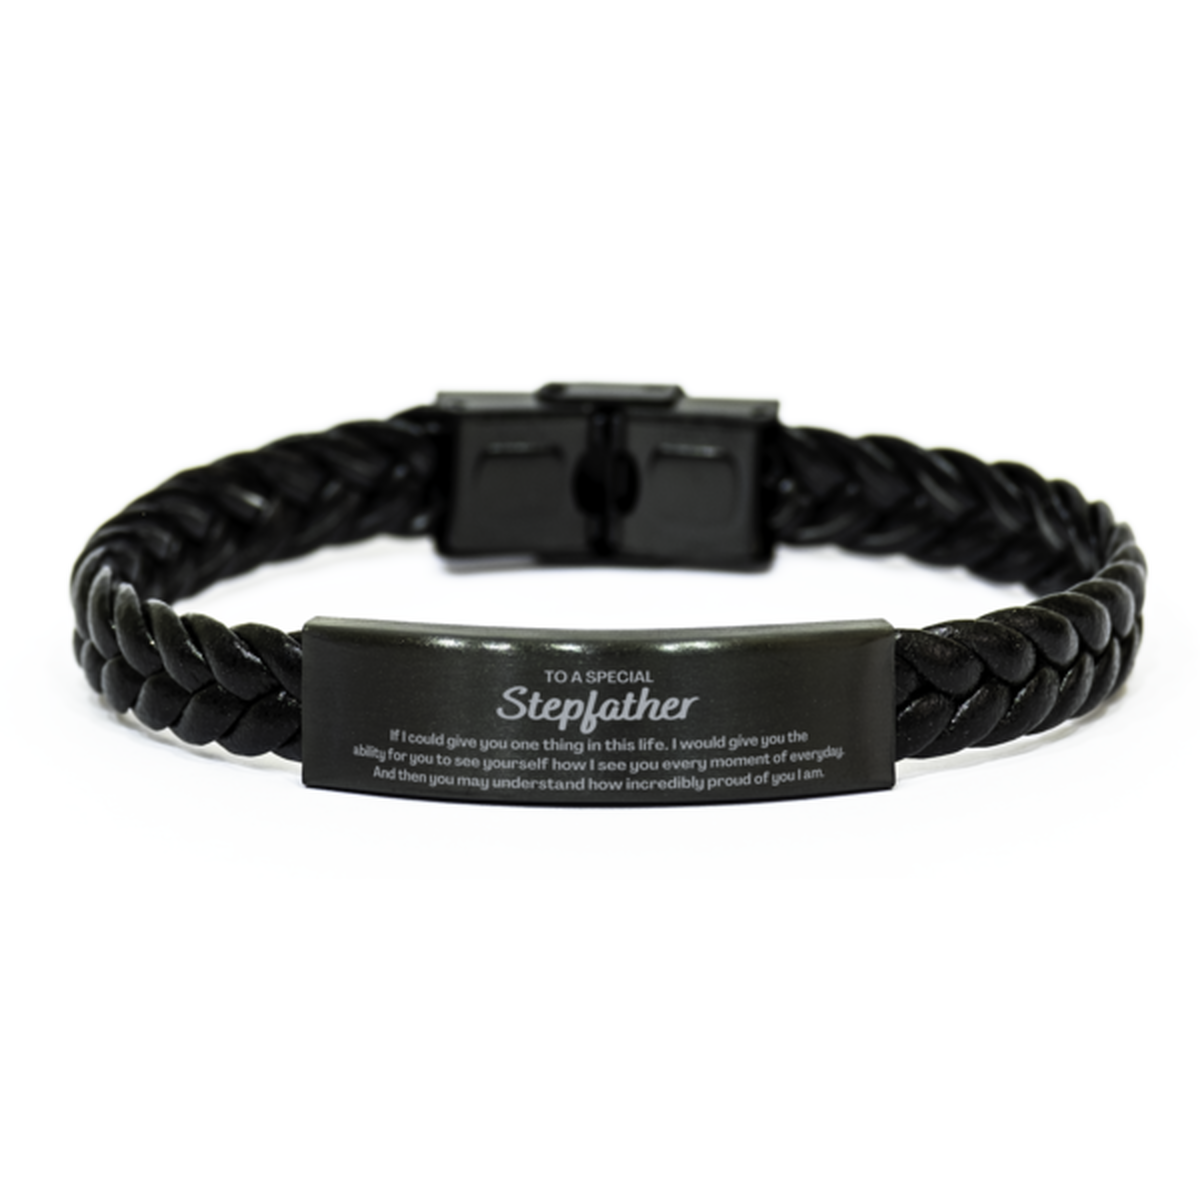 To My Stepfather Braided Leather Bracelet, Gifts For Stepfather Engraved, Inspirational Gifts for Christmas Birthday, Epic Gifts for Stepfather To A Special Stepfather how incredibly proud of you I am